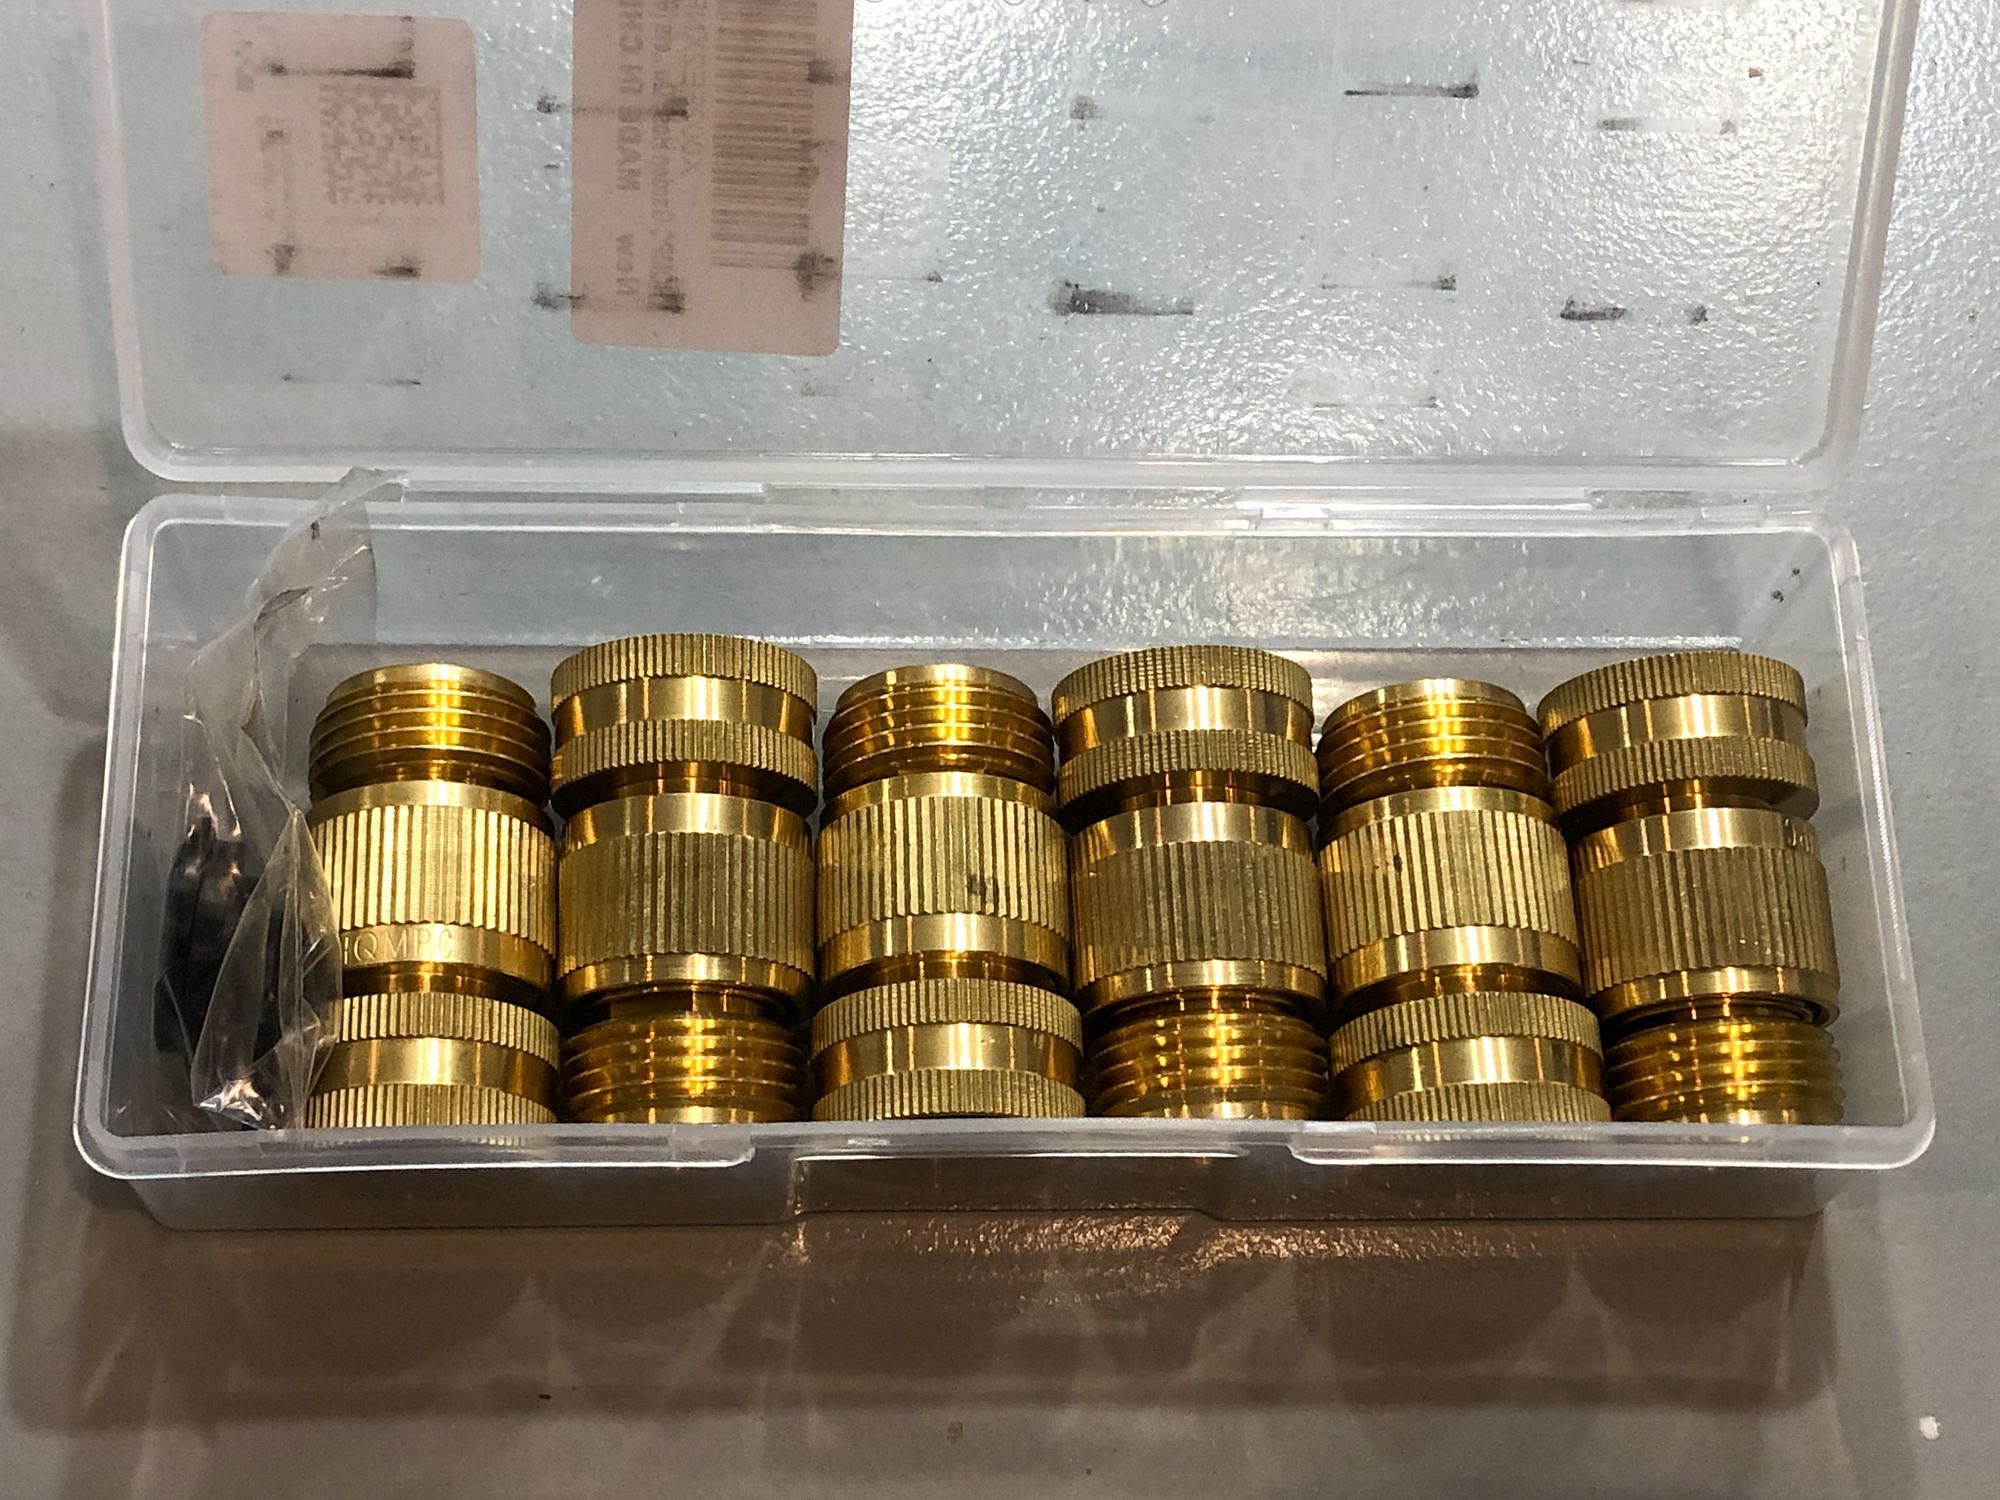 HQMPC Solid Brass Quick Connector Garden Hose Fitting 6-Pack